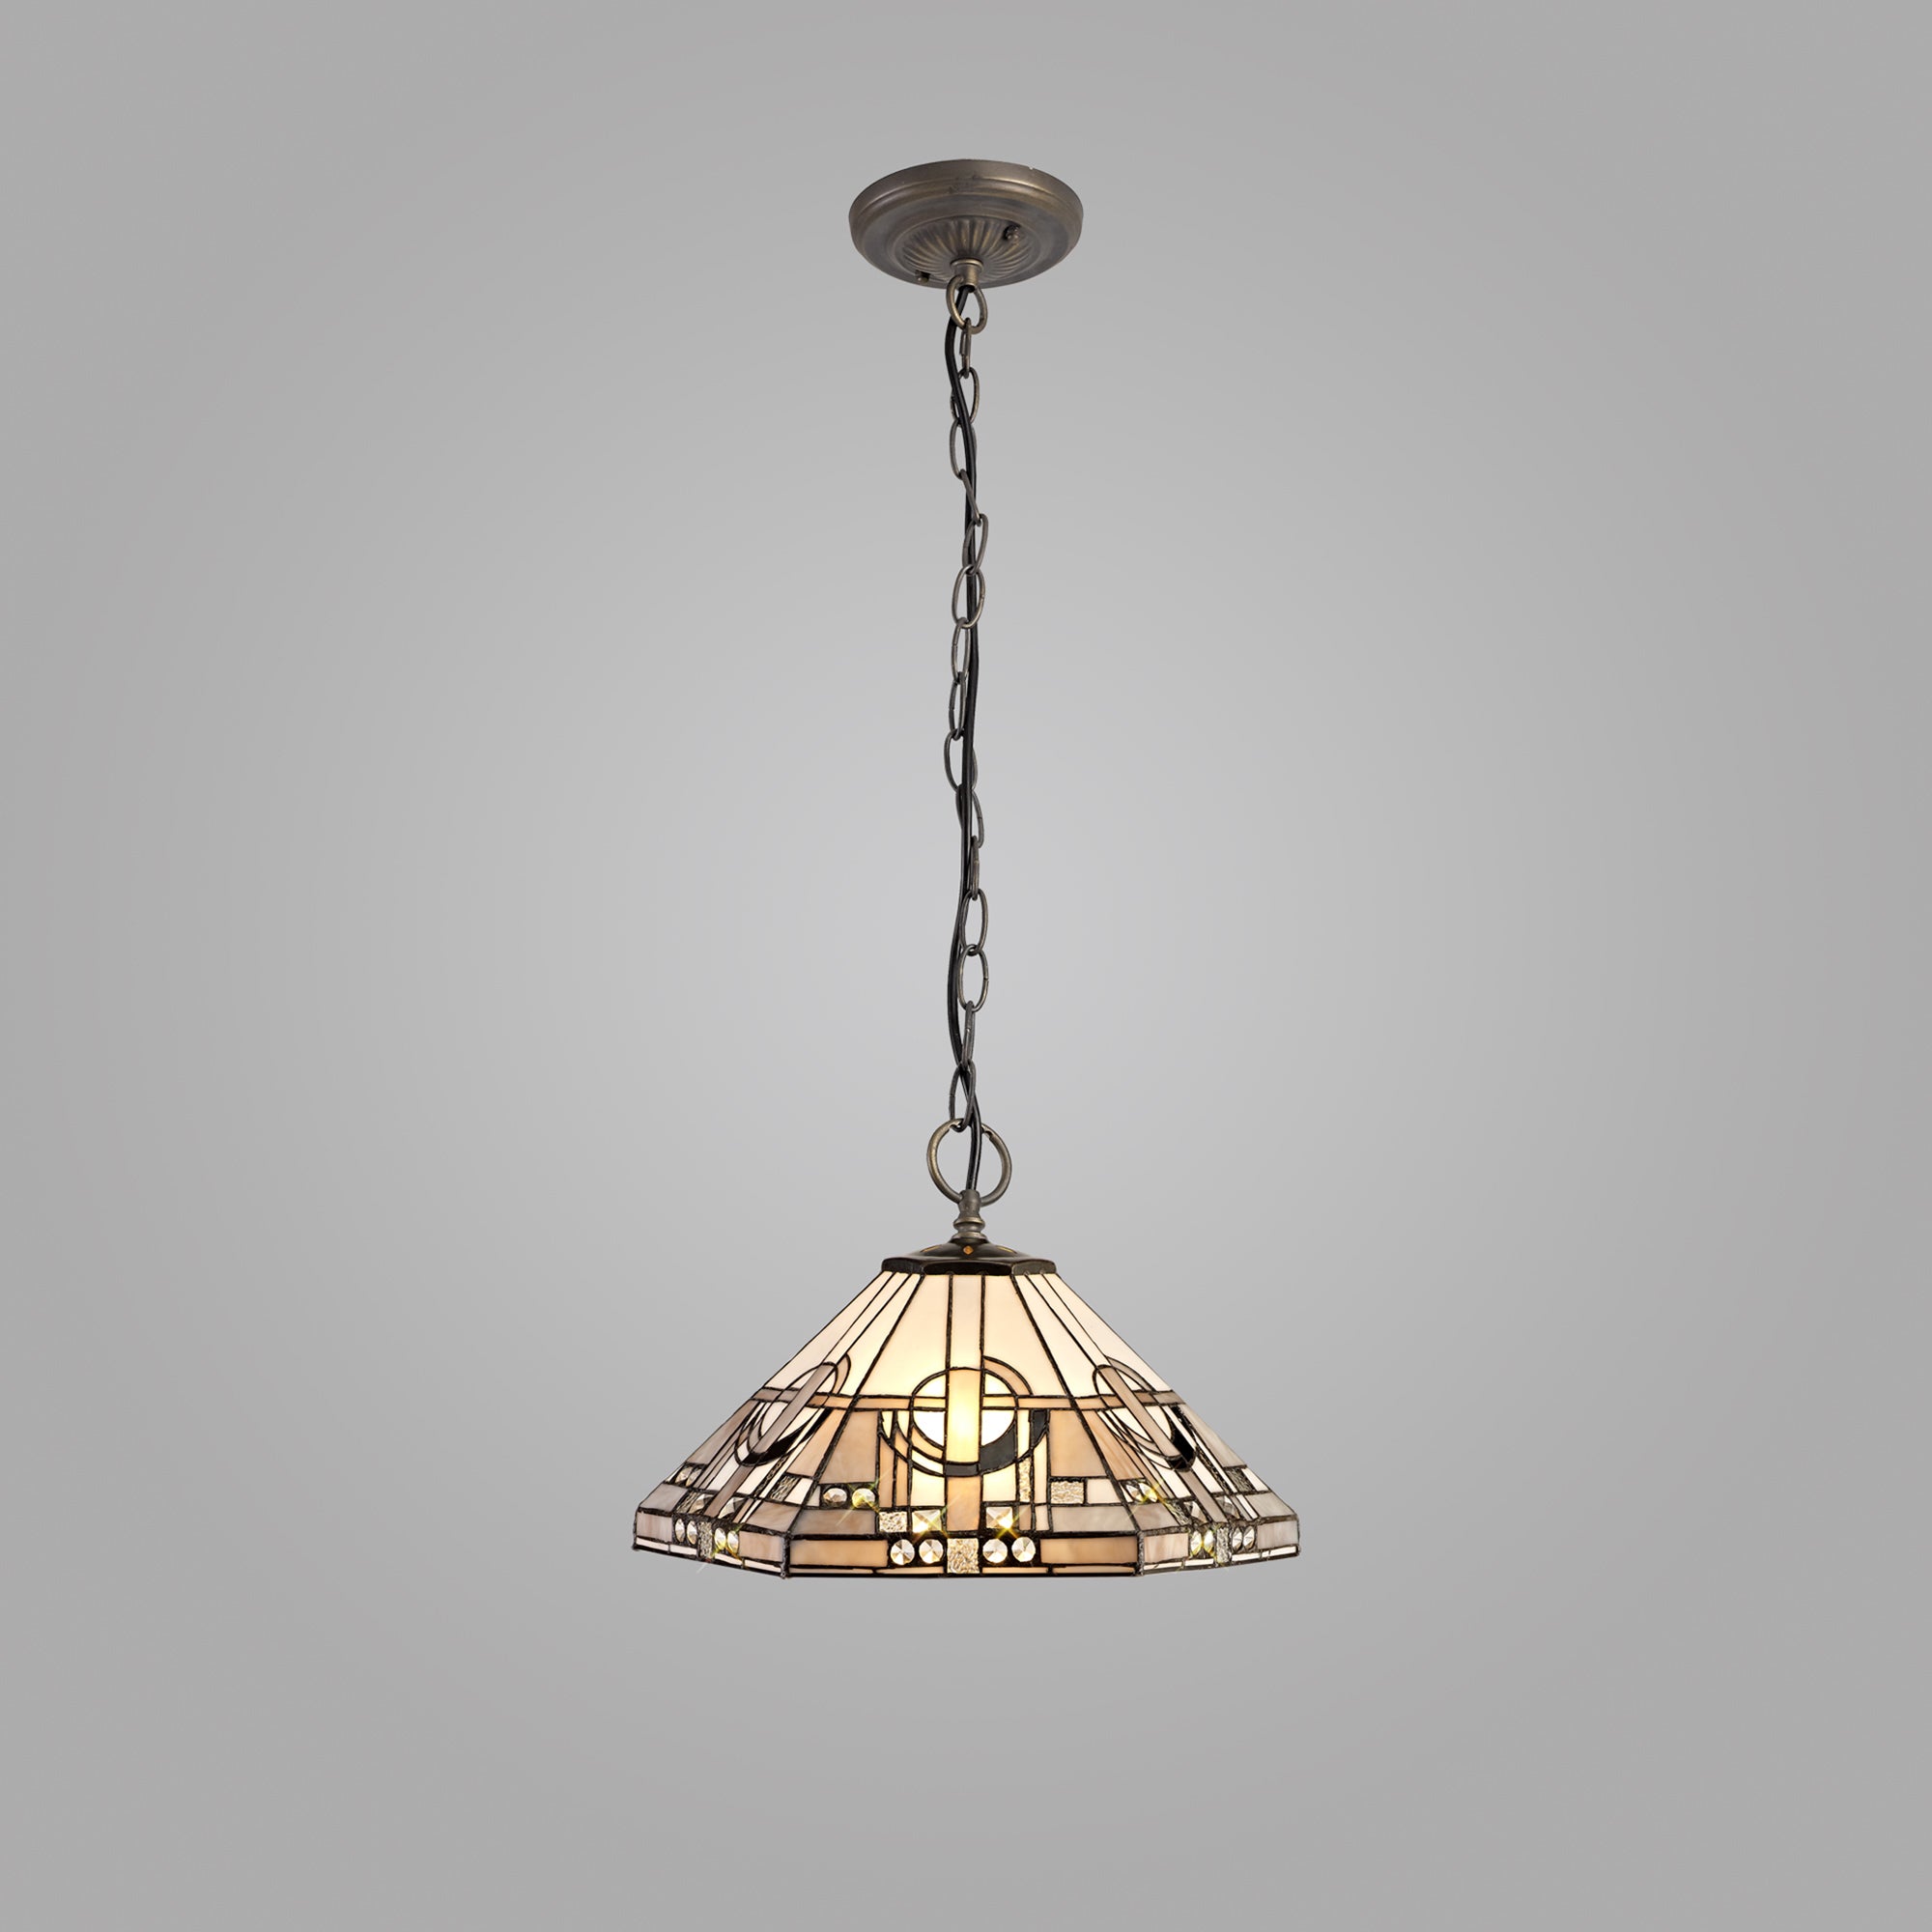 Atek 3 Light Downlighter Pendant E27 With 40cm Tiffany Shade, White/Grey/Black/Clear Crystal/Aged Antique Brass